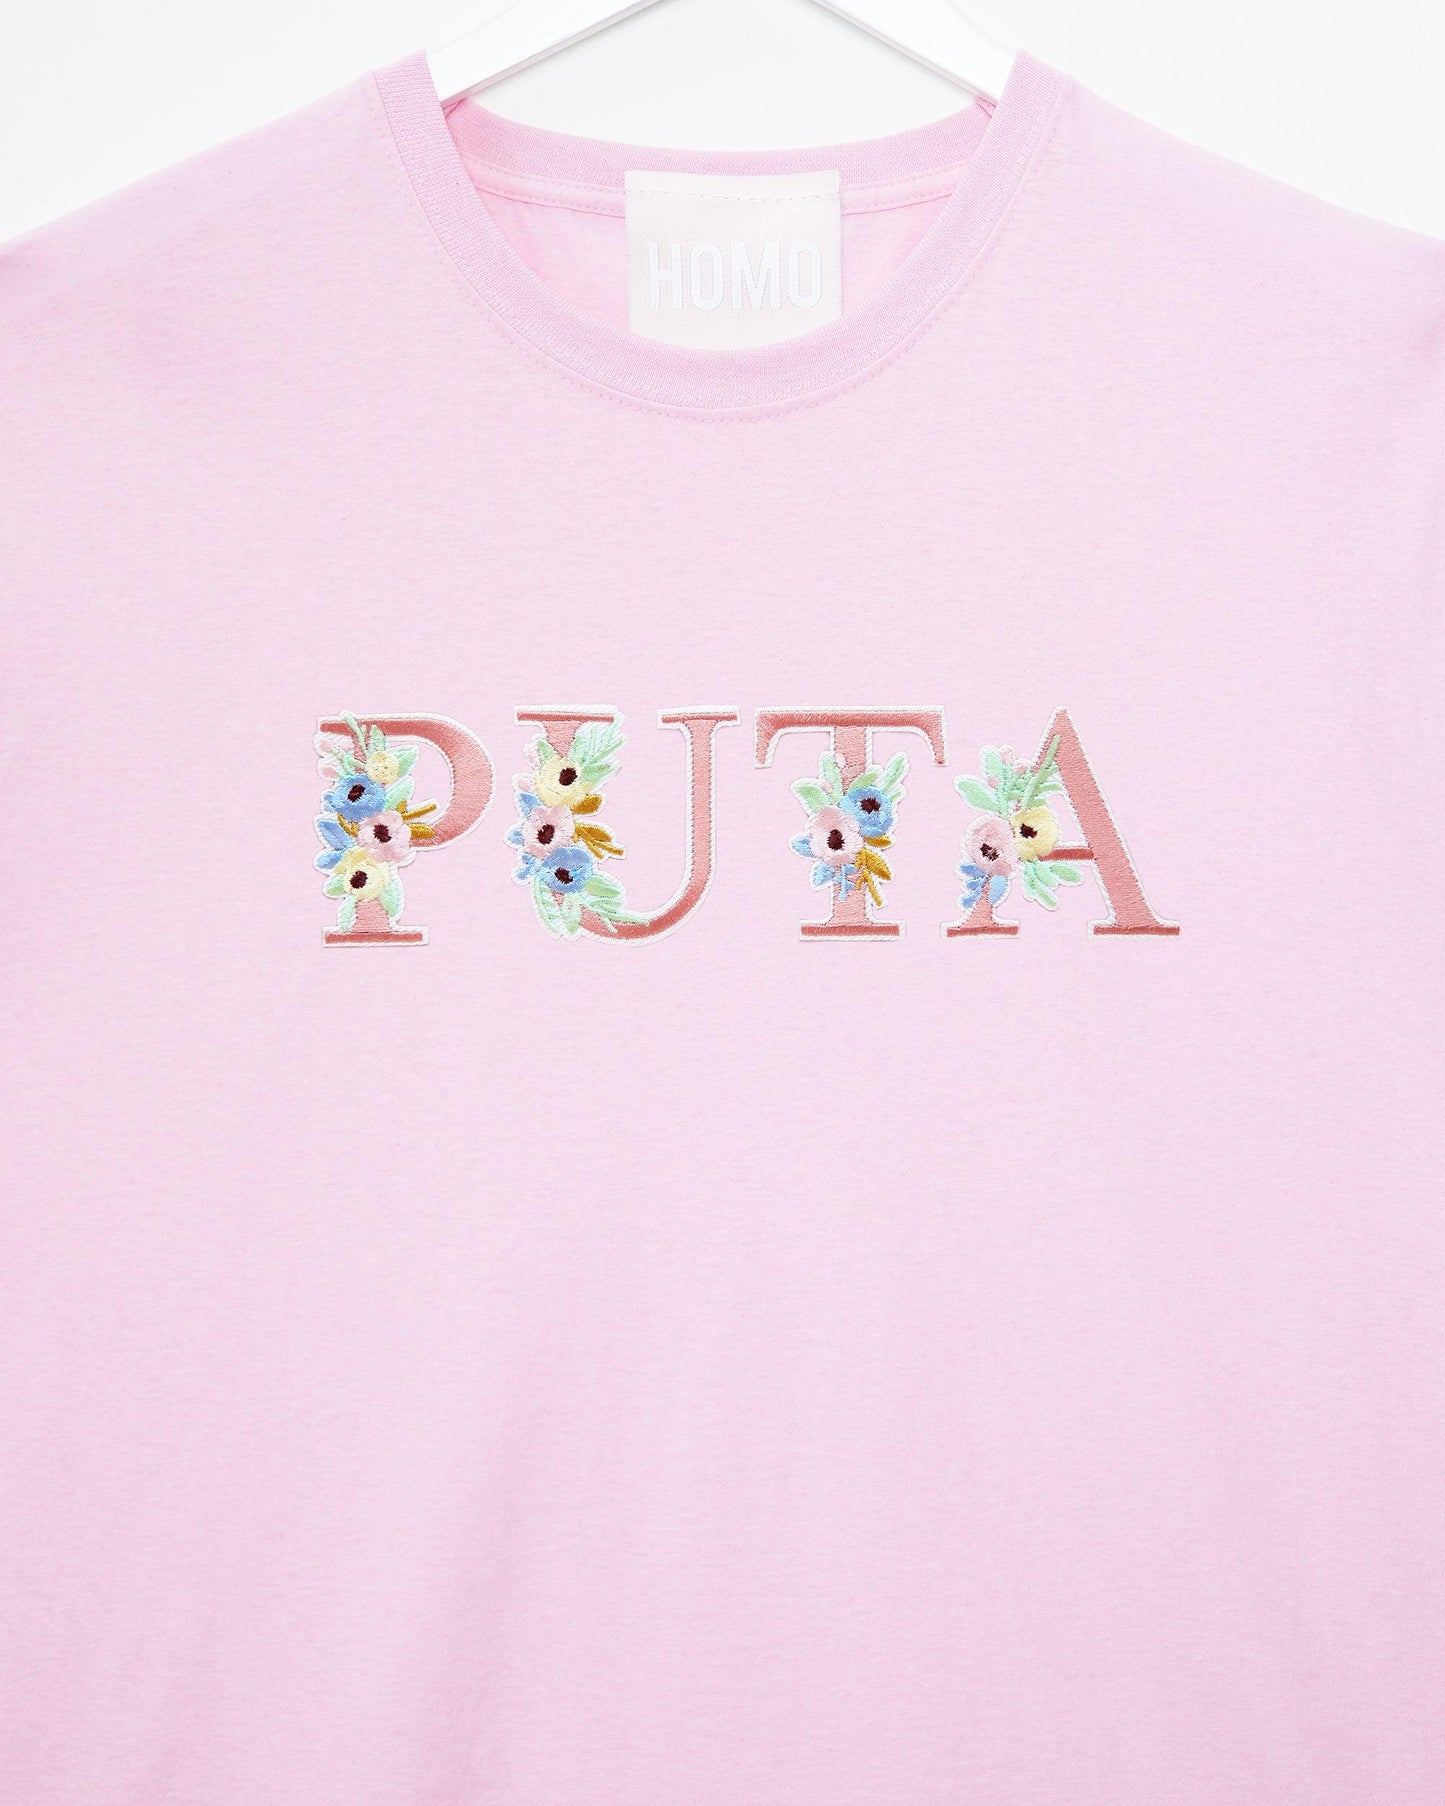 Floral style puta embroidery on pink - tee - HOMOLONDON